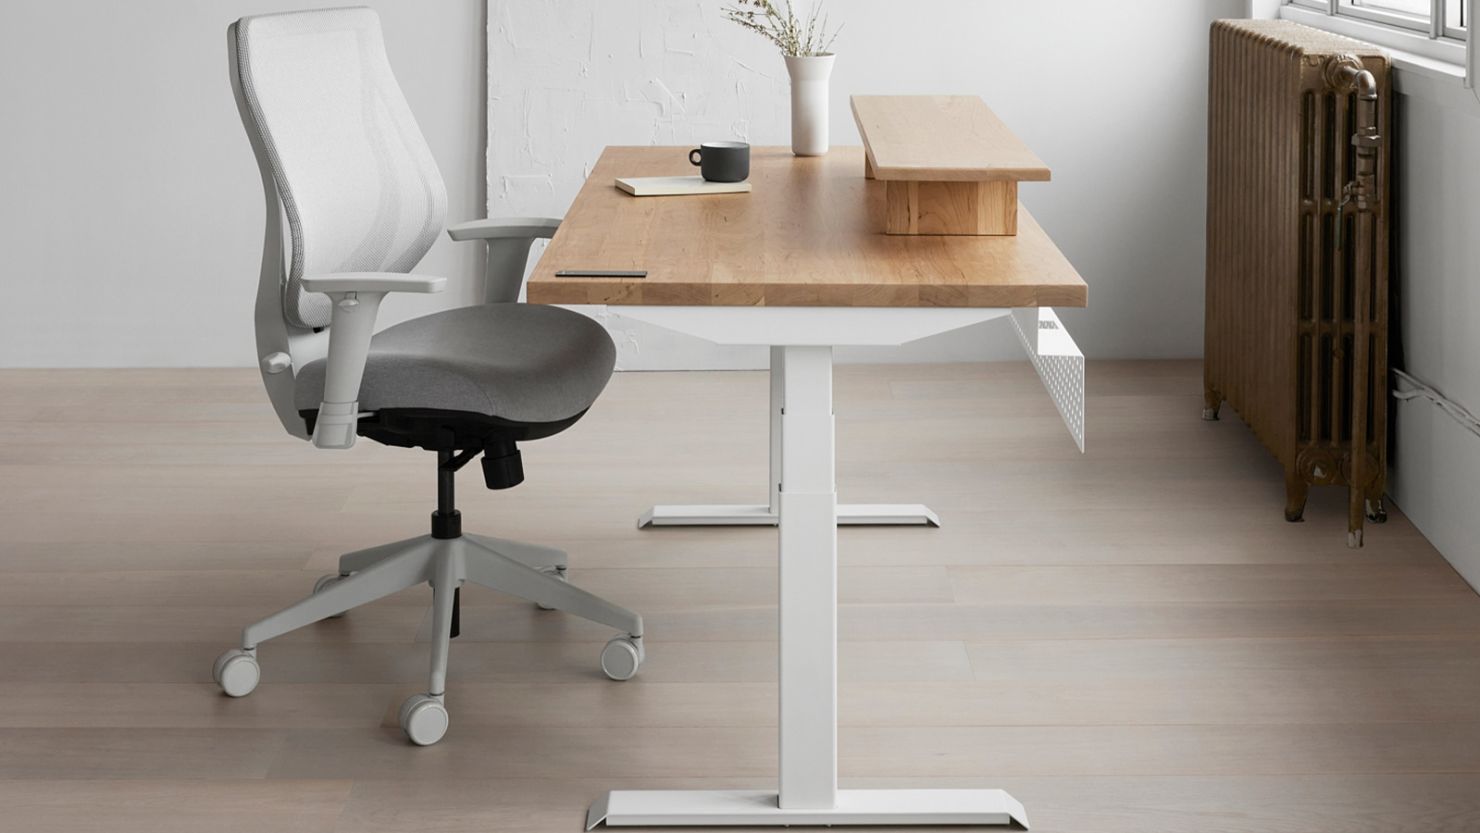 LA's Work From Home Desks Is A Stylish & Sustainable Office Option